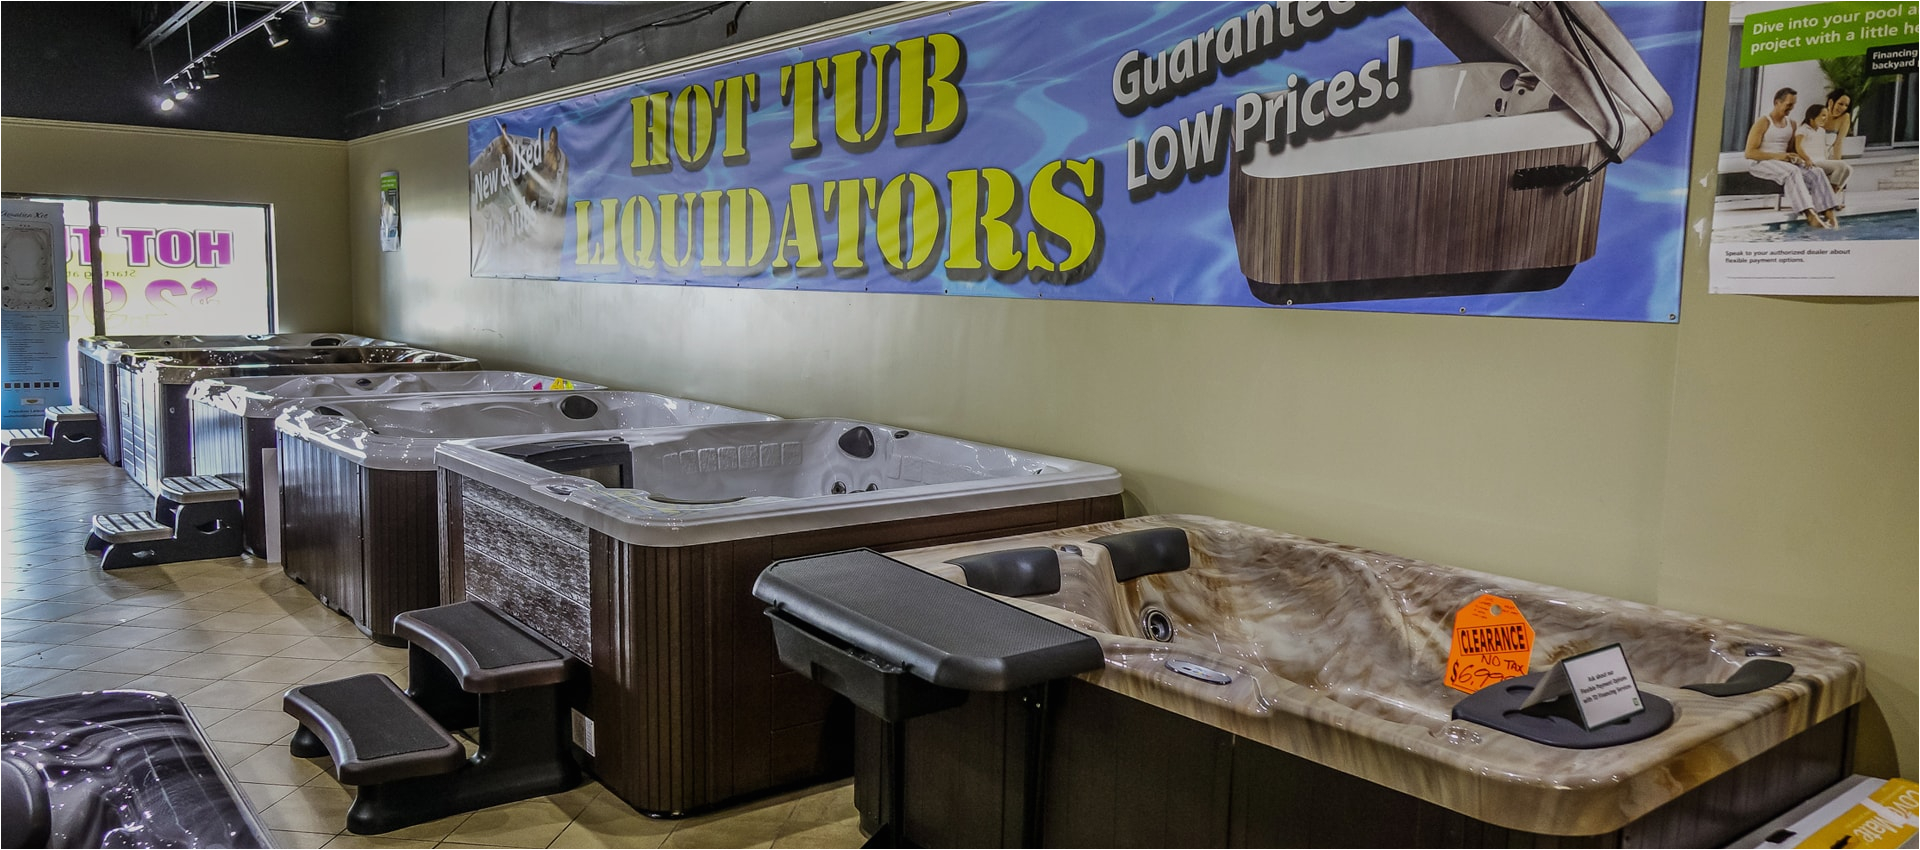 Used Jetted Bathtub Hot Tub Liquidators Certified New & Used Hot Tubs for Less